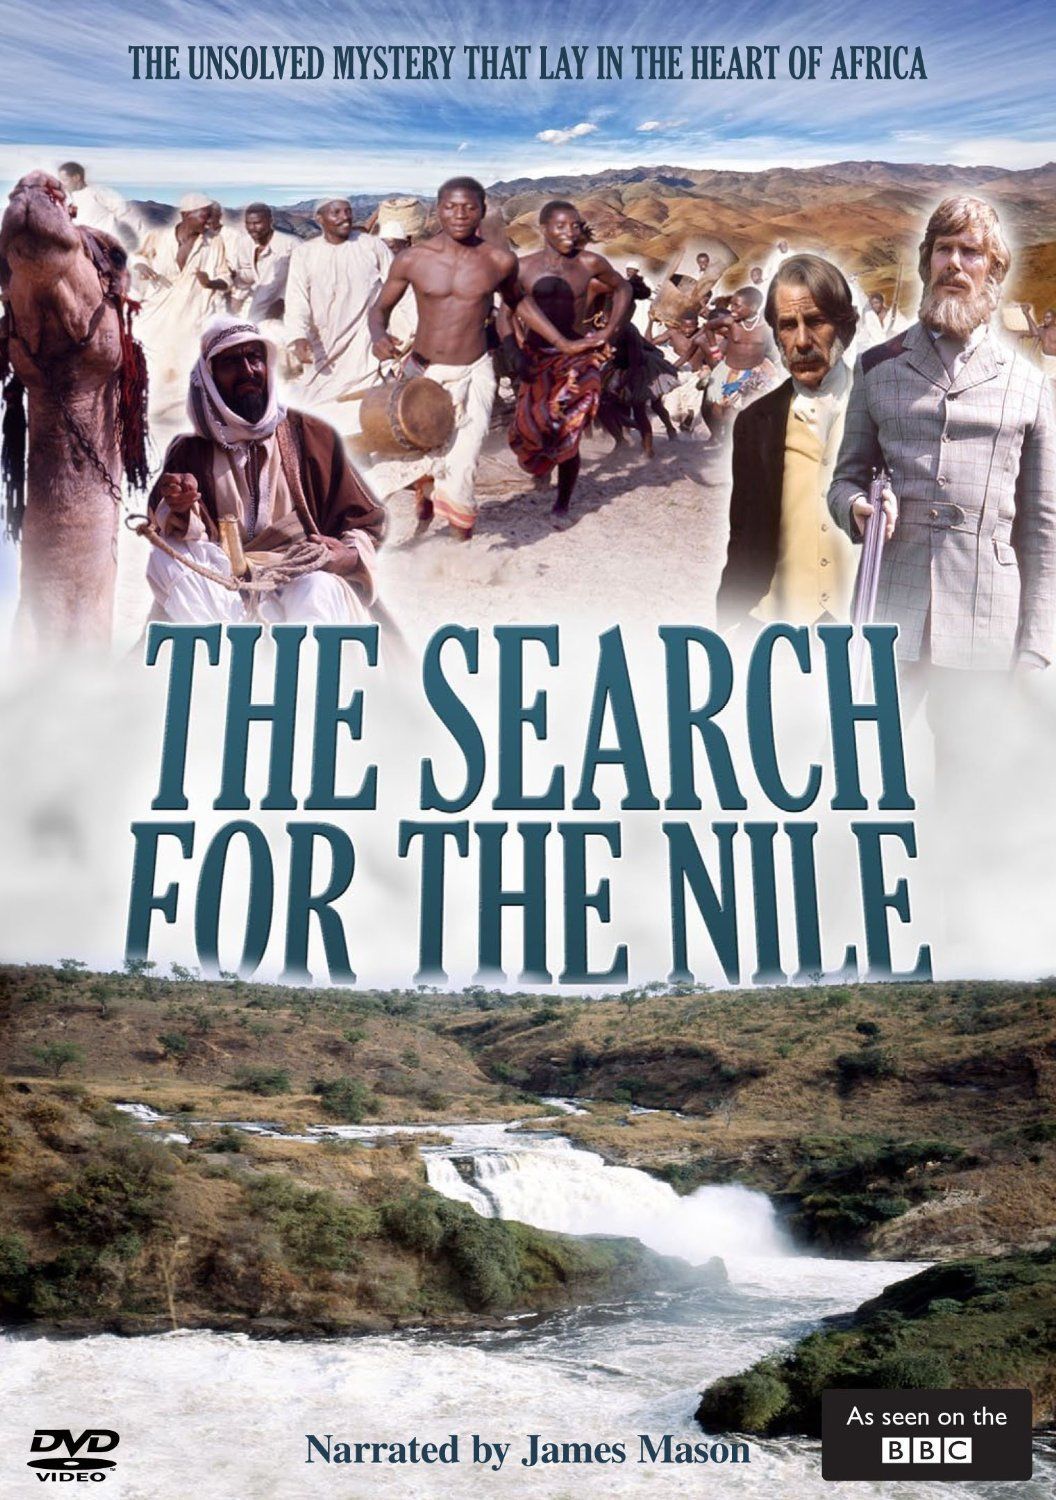 The Search for the Nile ne zaman